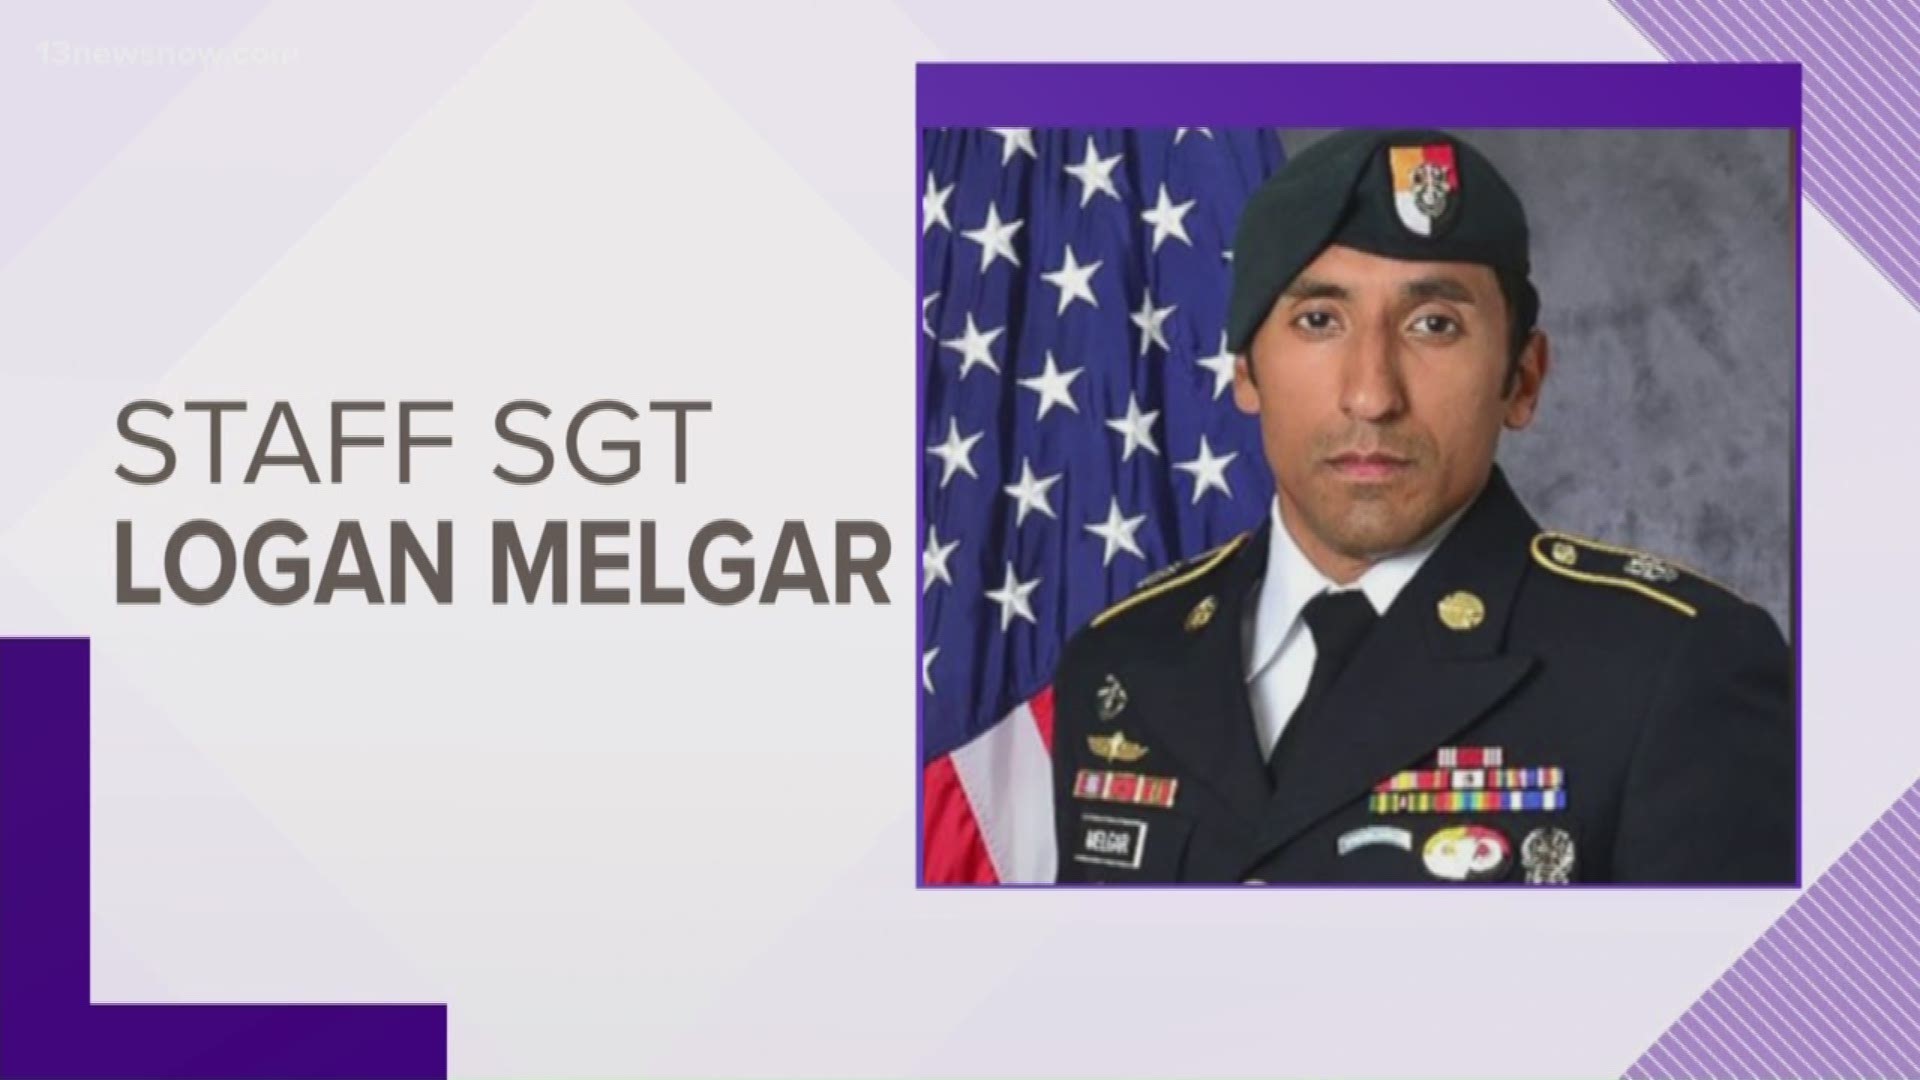 Four military personnel have been charged in connection with the June 2017 death of an Army Green Beret in the African country of Mali.